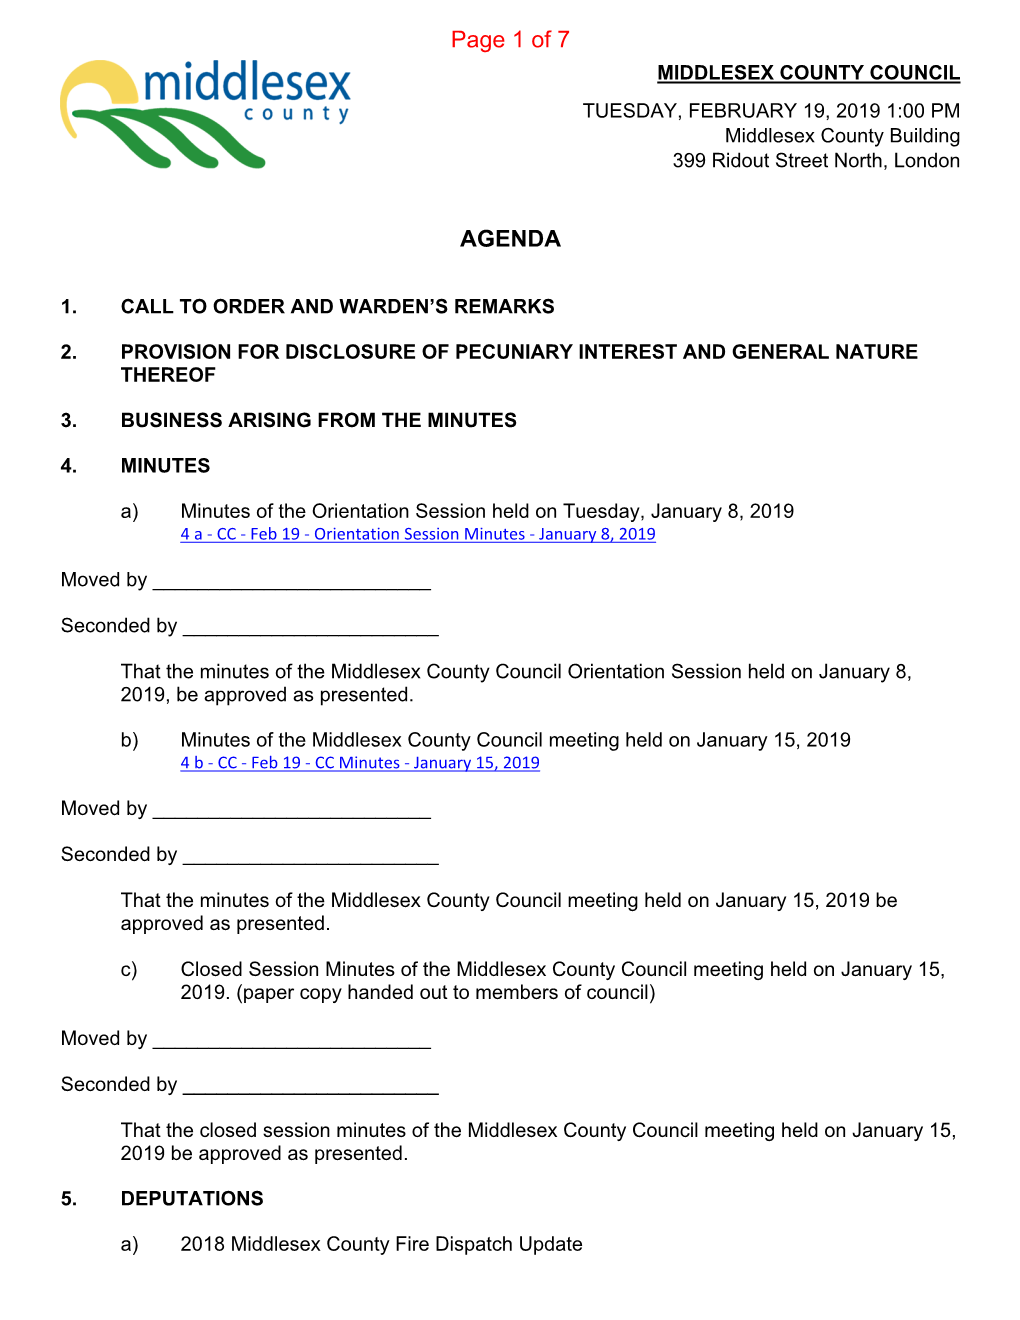 AGENDA Page 1 of 7